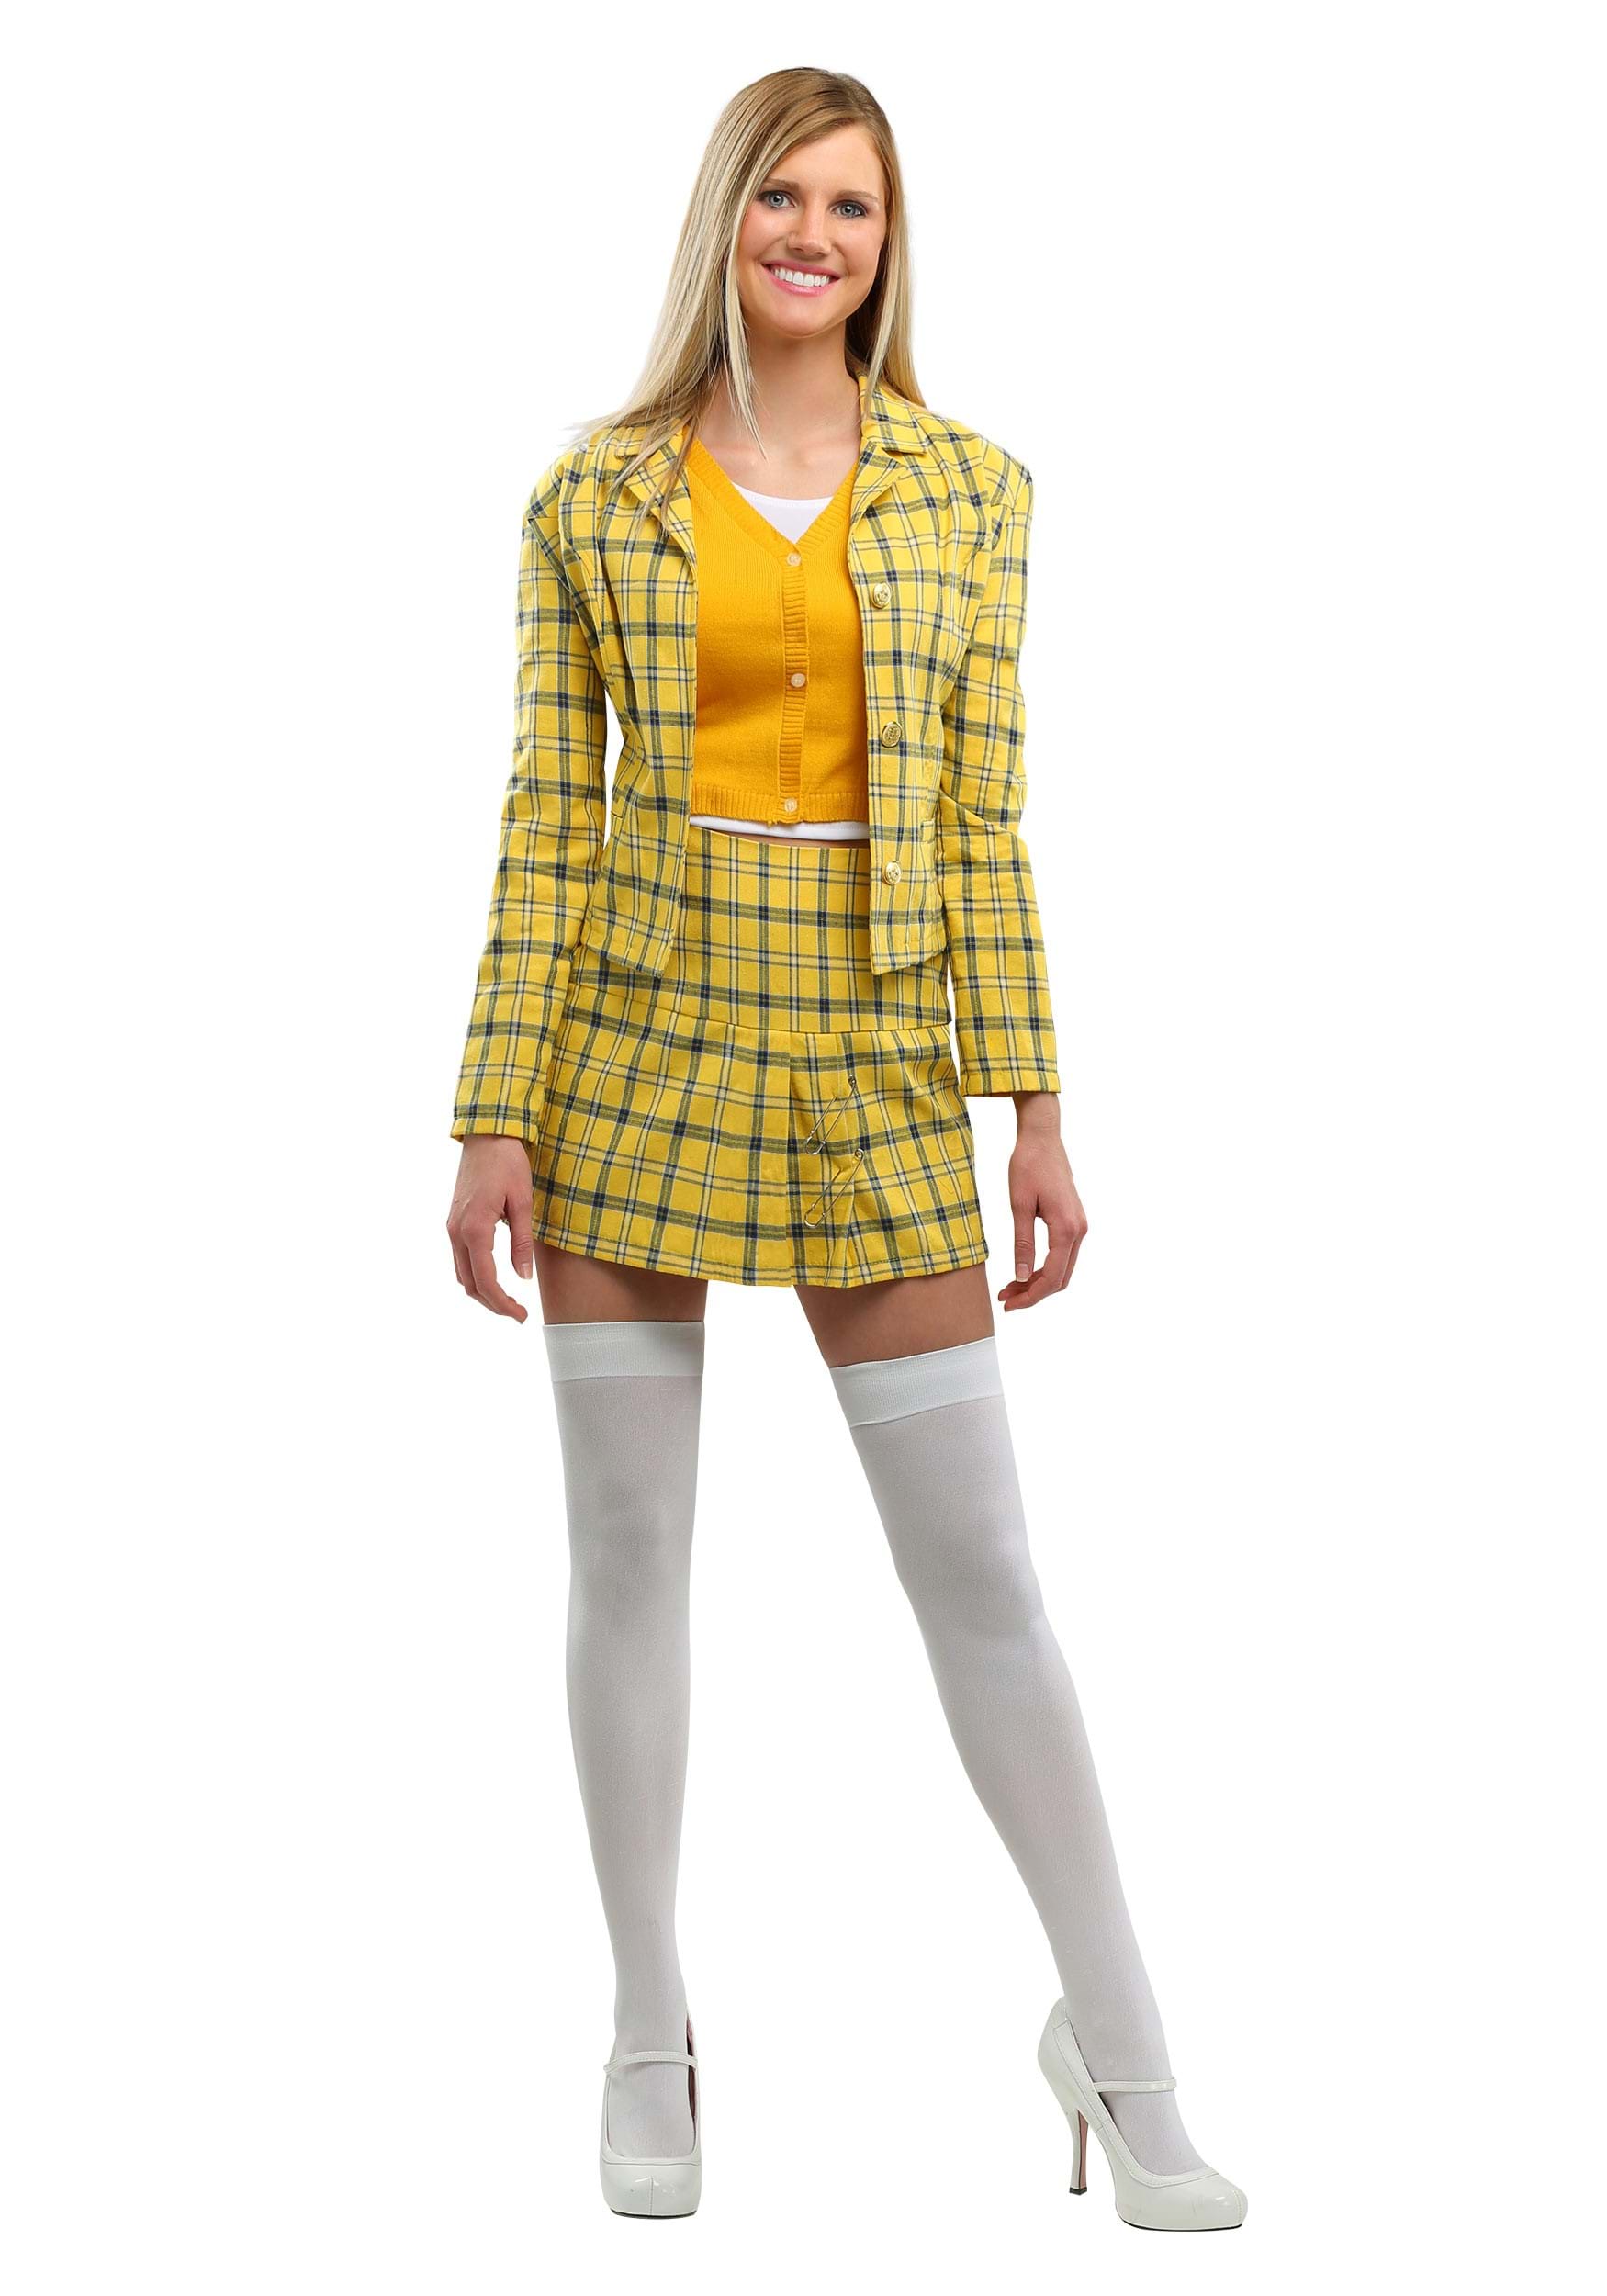 Clueless Cher Plus Size Womens Costume | 90s Movie Costume